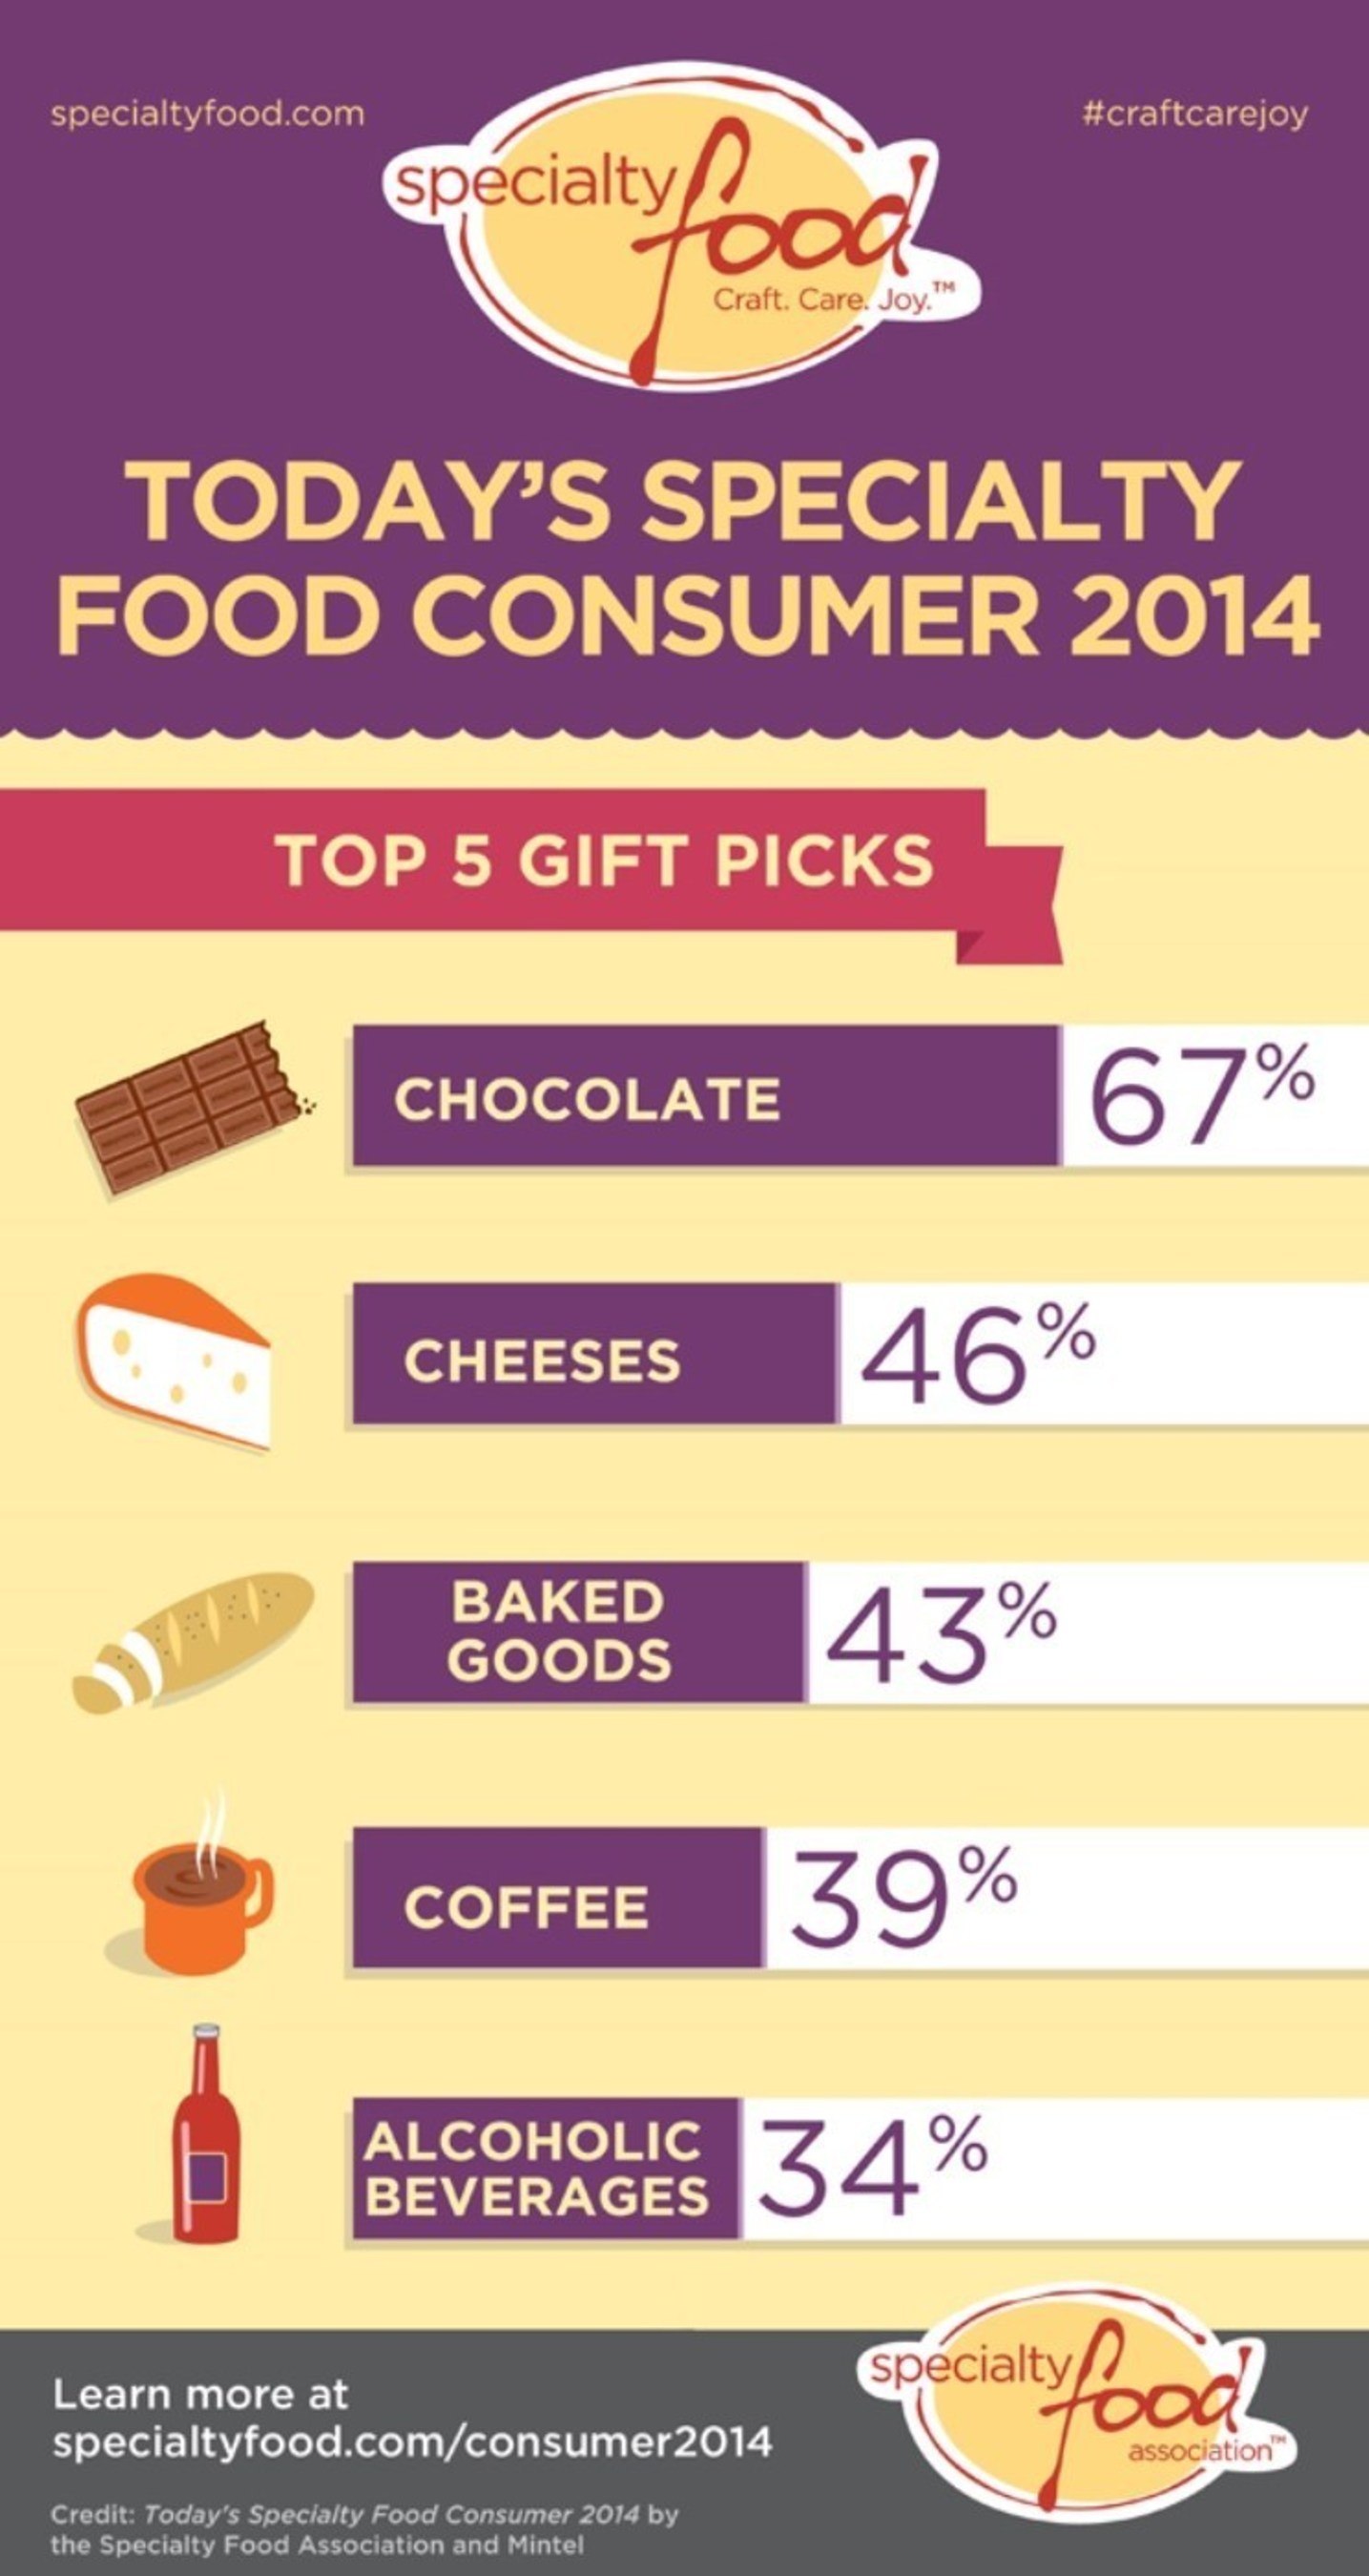 Chocolate Top Pick for Specialty Food Gifts 2014.